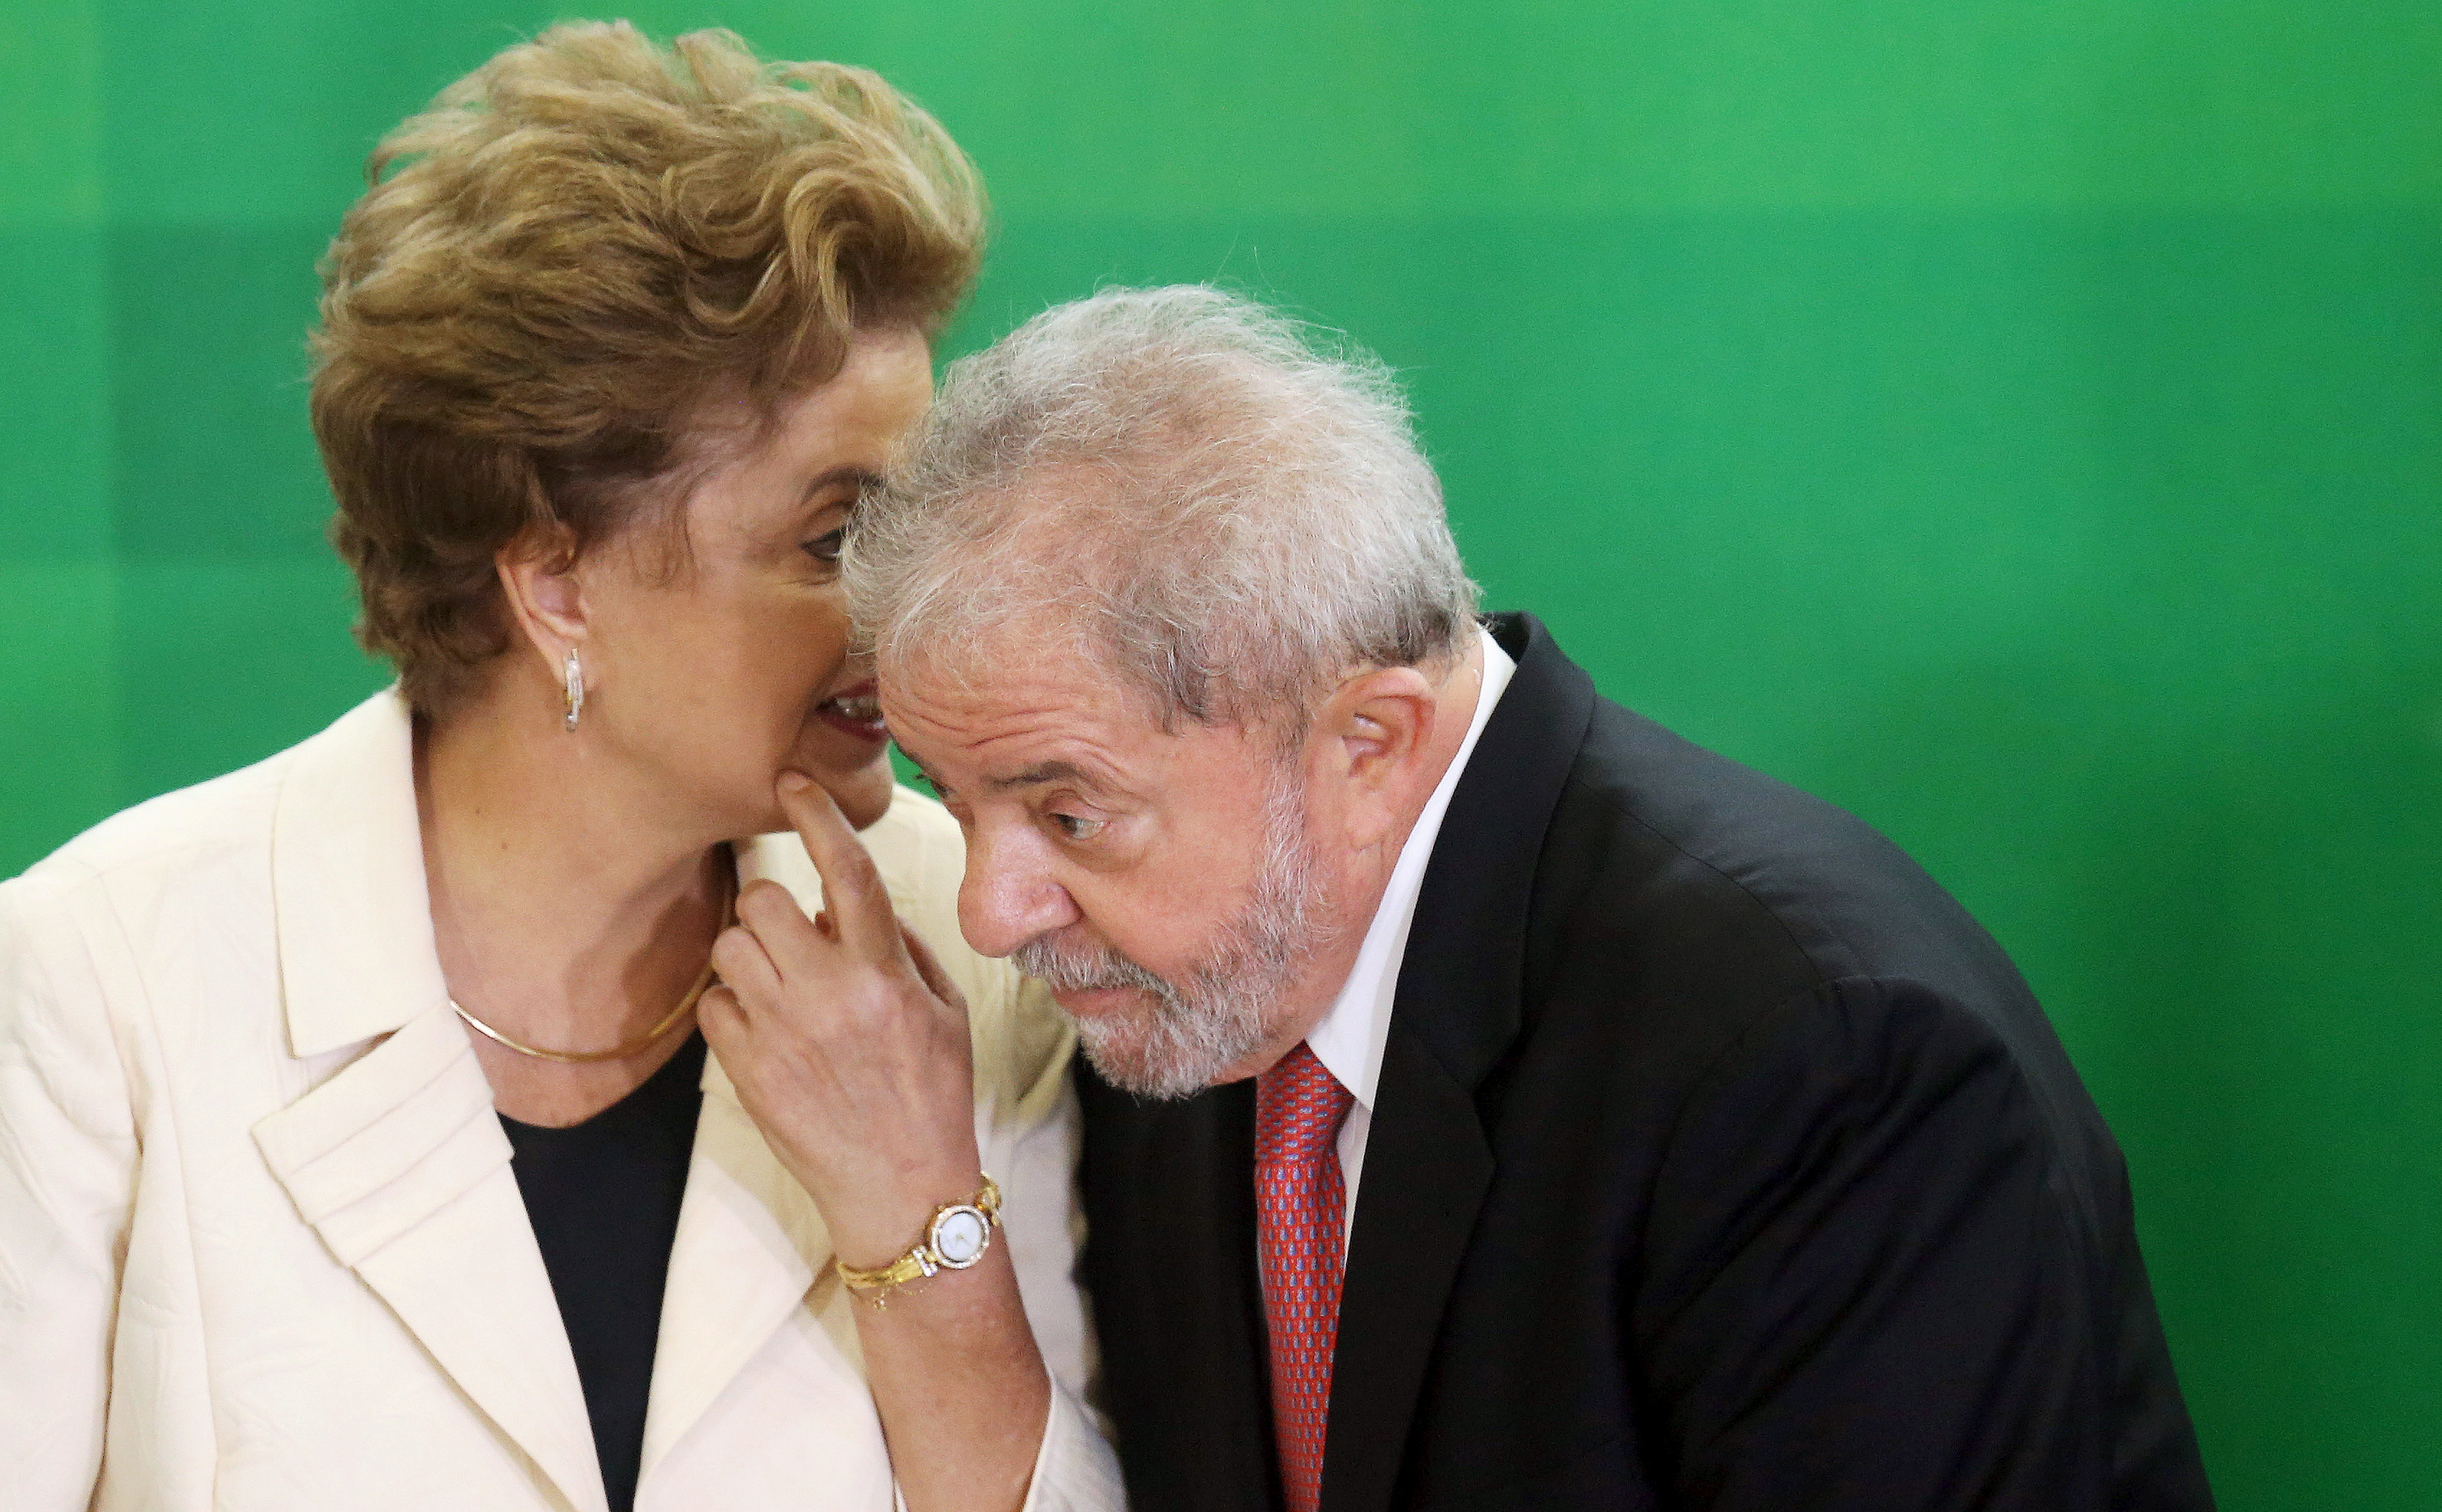 Brazil's President Dilma Rousseff (L) talks with former president Luiz Inacio Lula da Silva during the appointment of Lula da Silva as chief of staff, at Planalto palace in Brasilia, Brazil, March 17, 2016. REUTERS/Adriano Machado        TPX IMAGES OF THE DAY - RTSAWOI